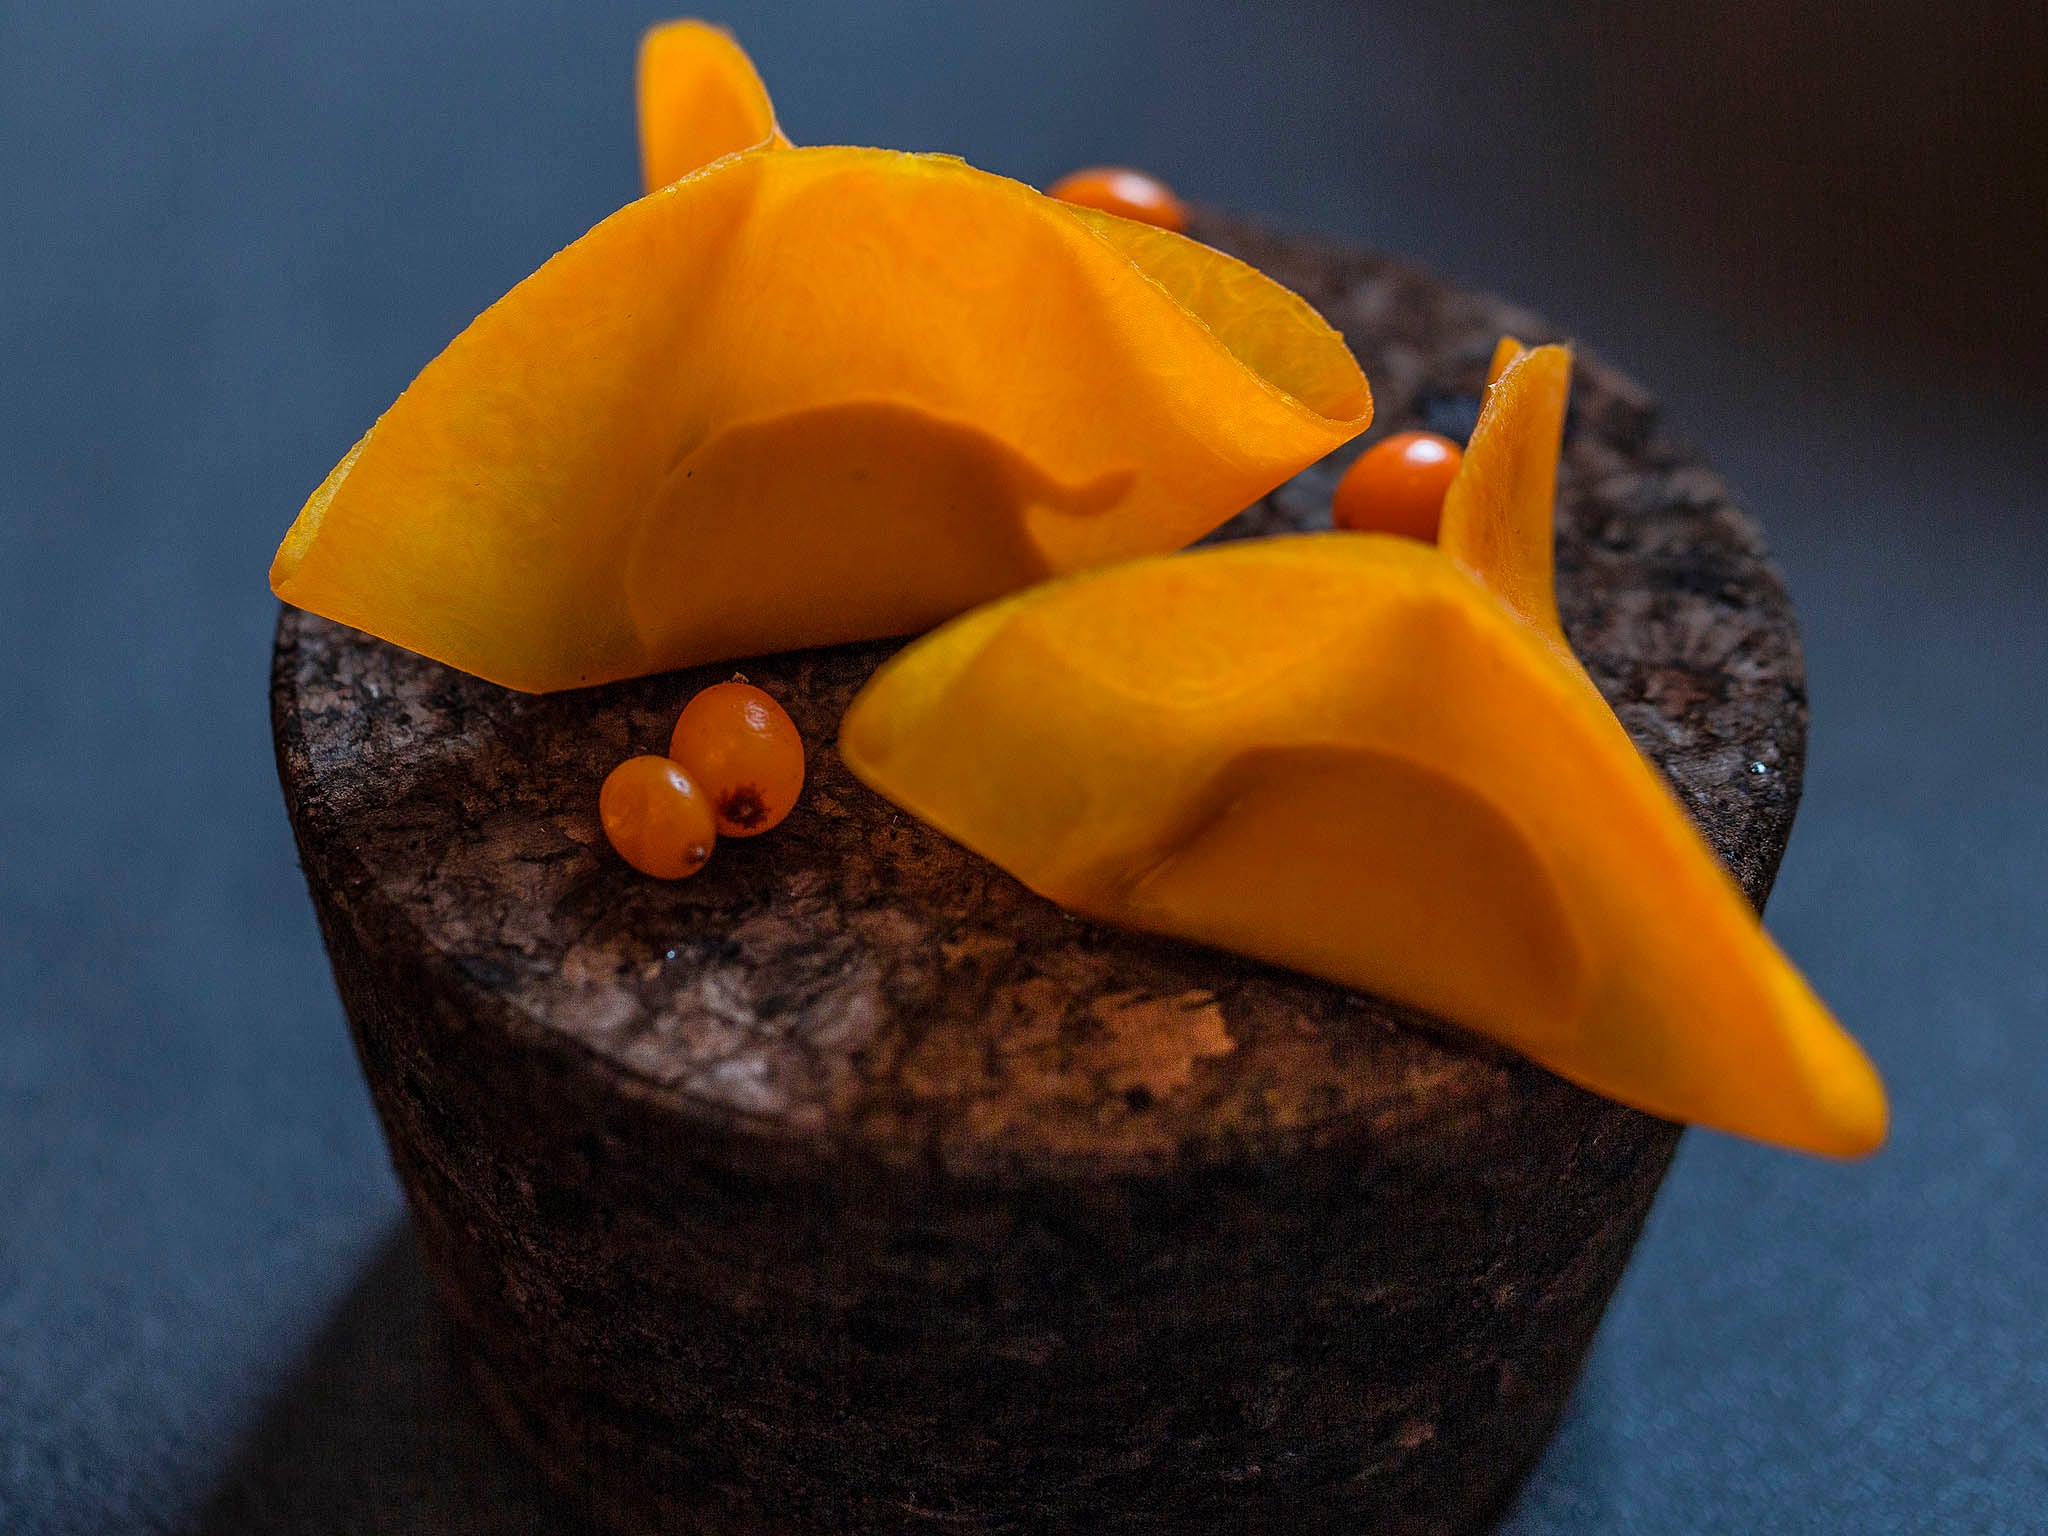 Old meets new on the White Rabbit menu, such as sour pumpkin, cheese, pine nuts and white truffle